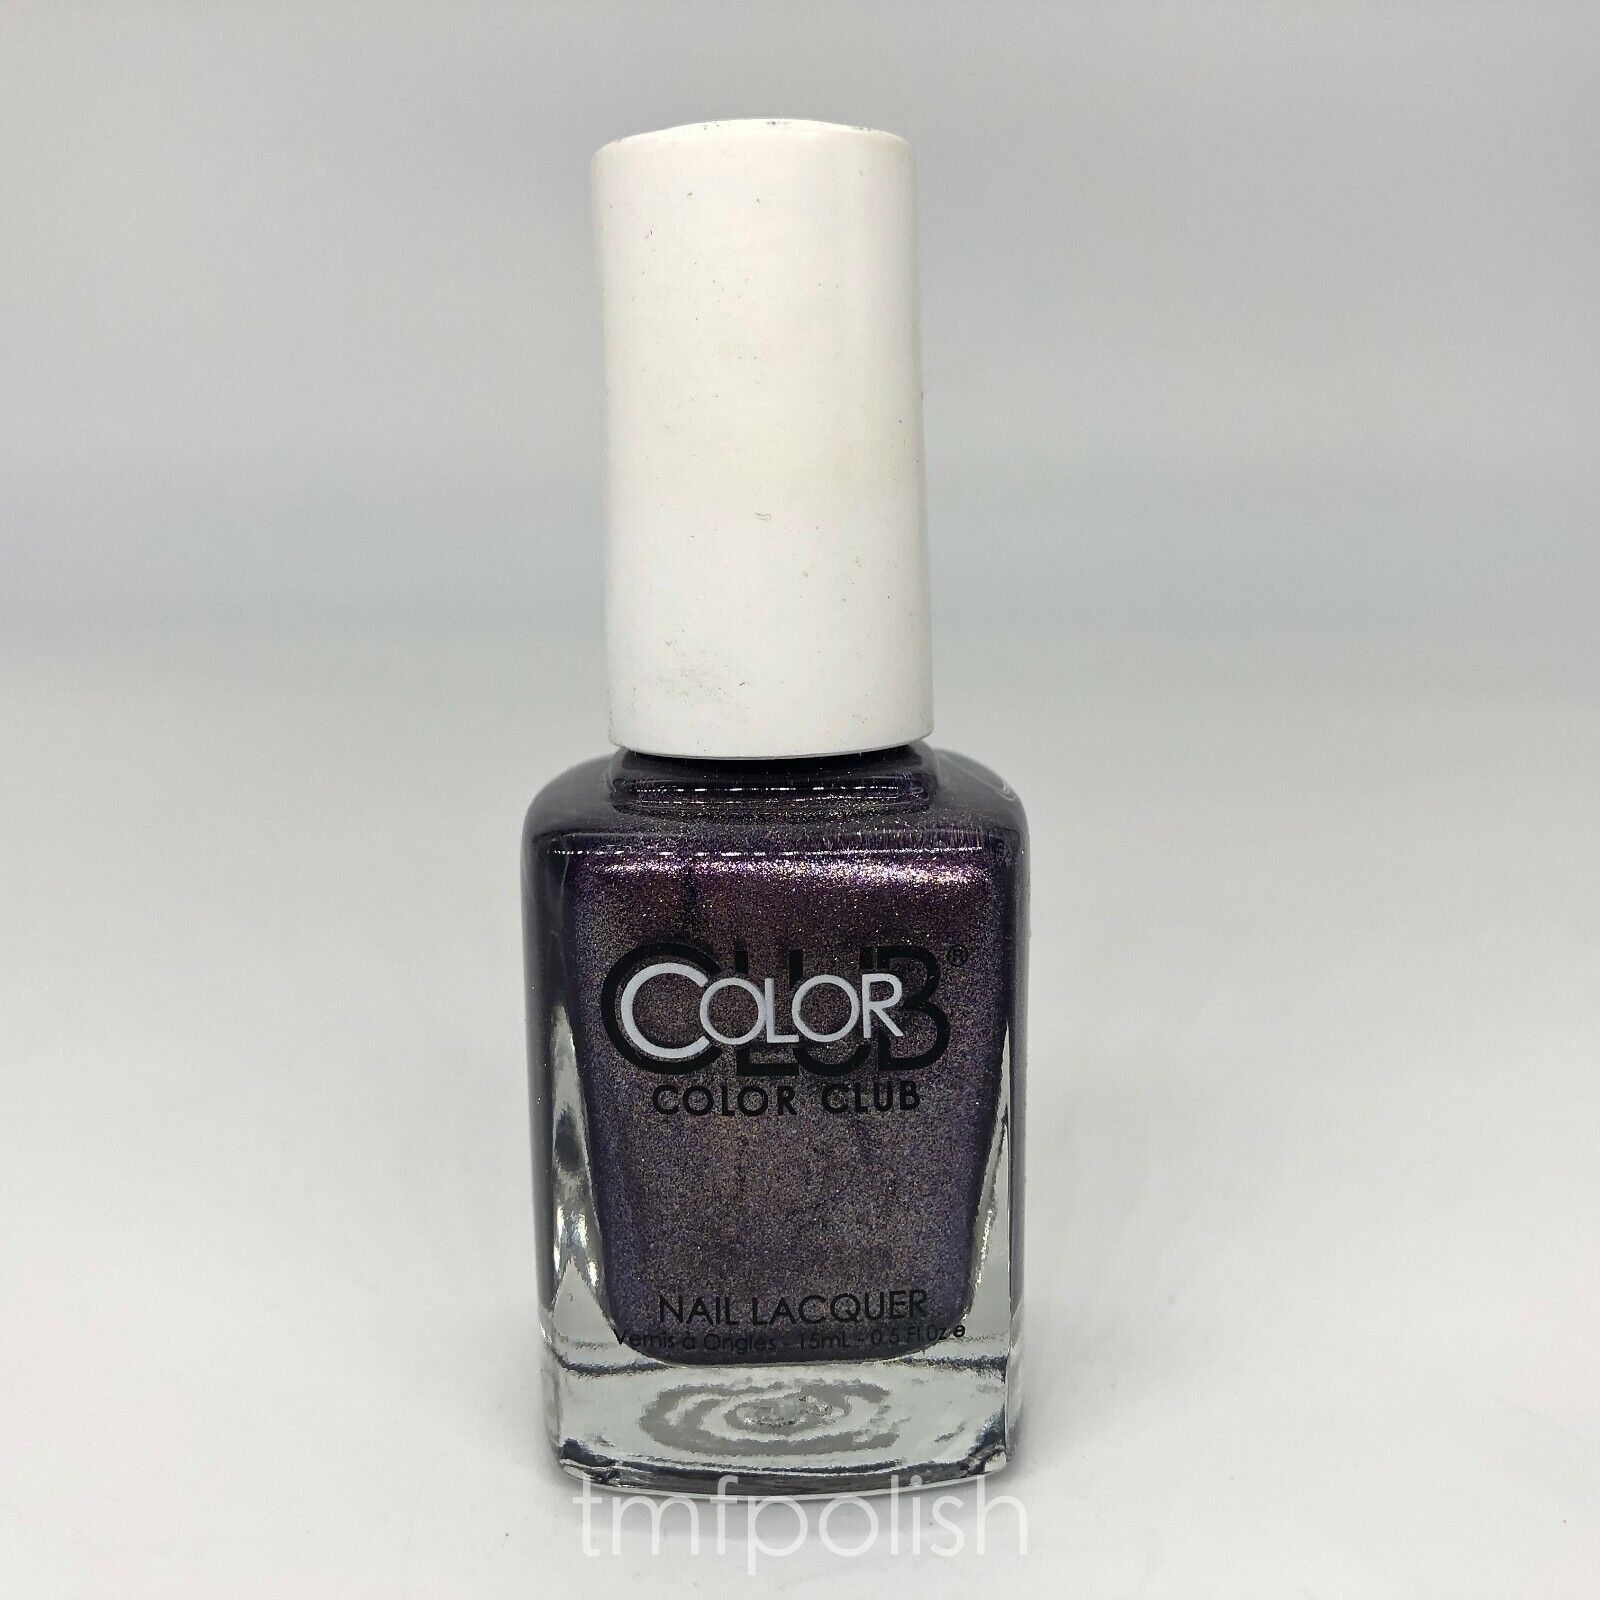 Brand New Color Club Nail Polish - Alter Ego - Full Size